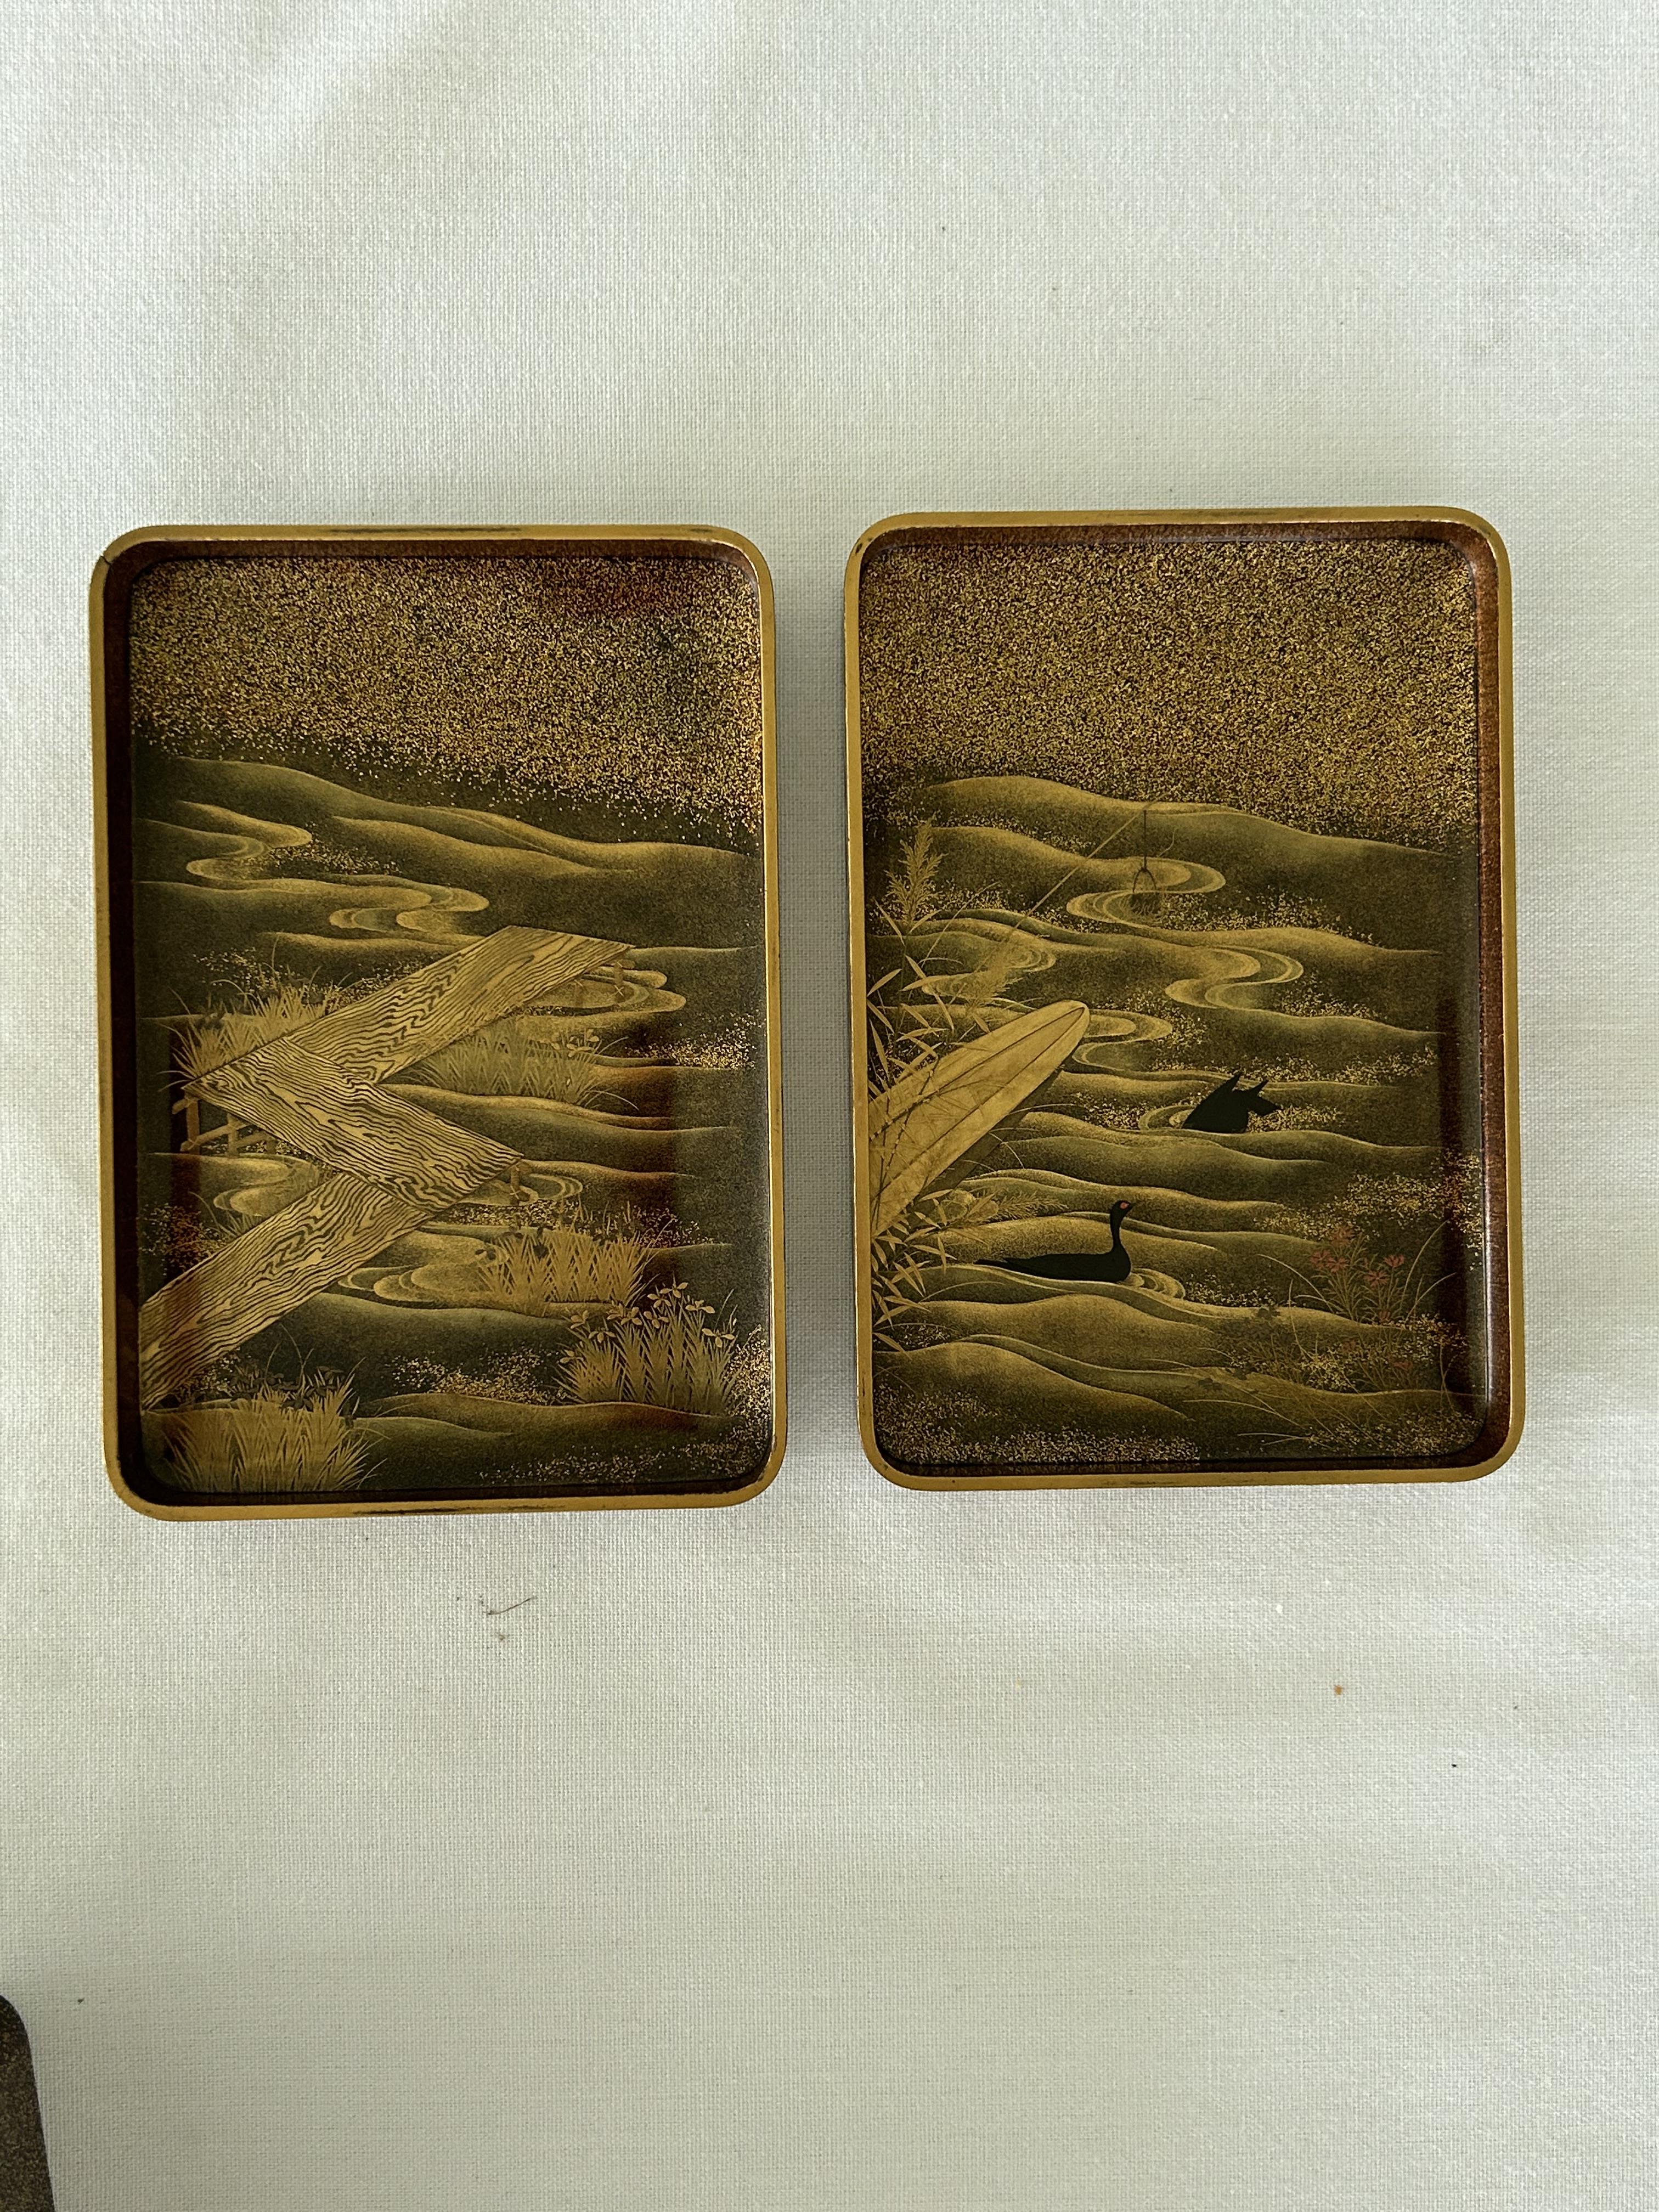 A 19th century Japanese gold lacquer box with interior tray and two boxes - Image 11 of 23